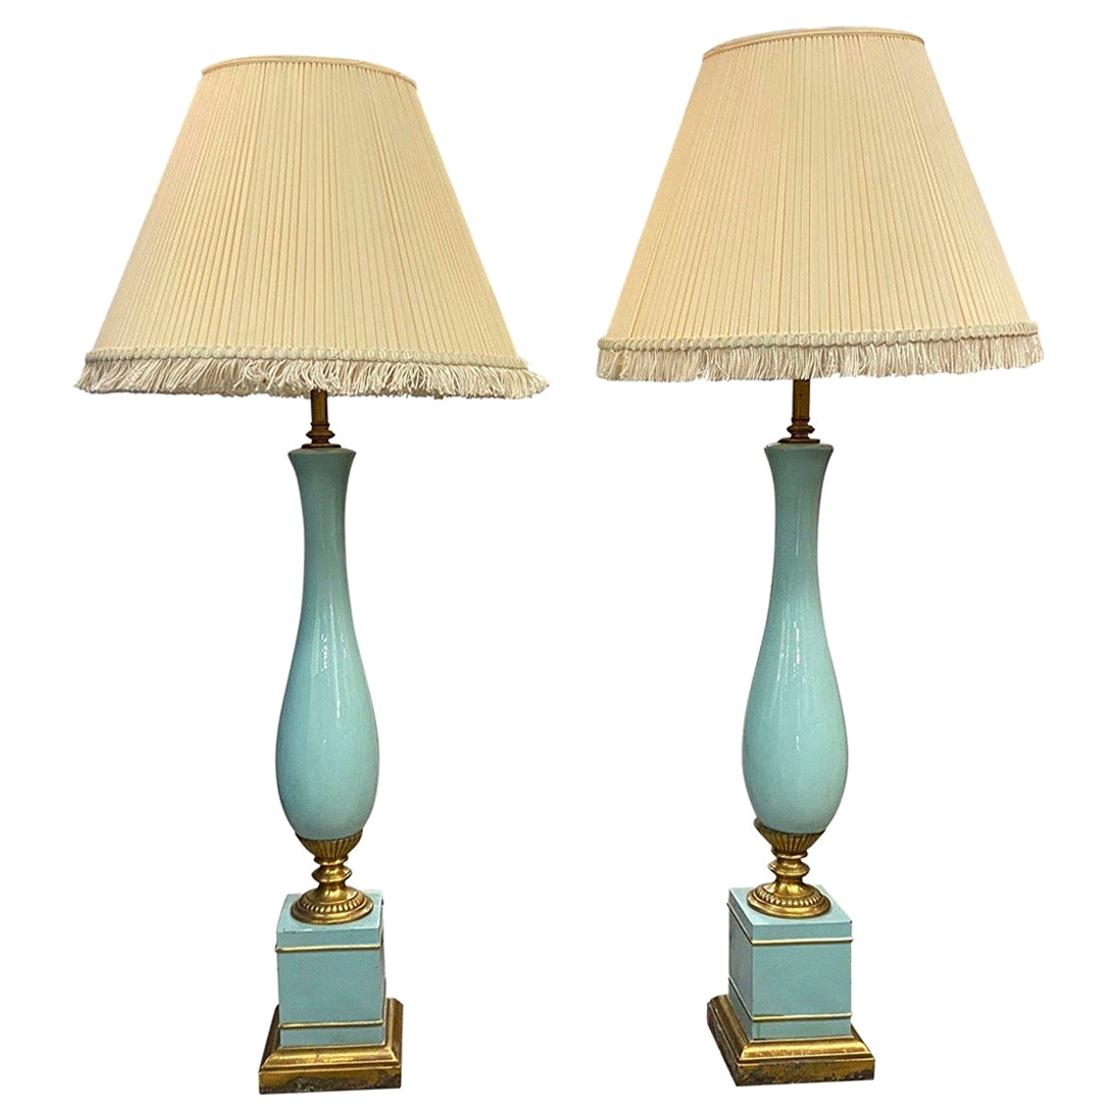 1950s table lamps